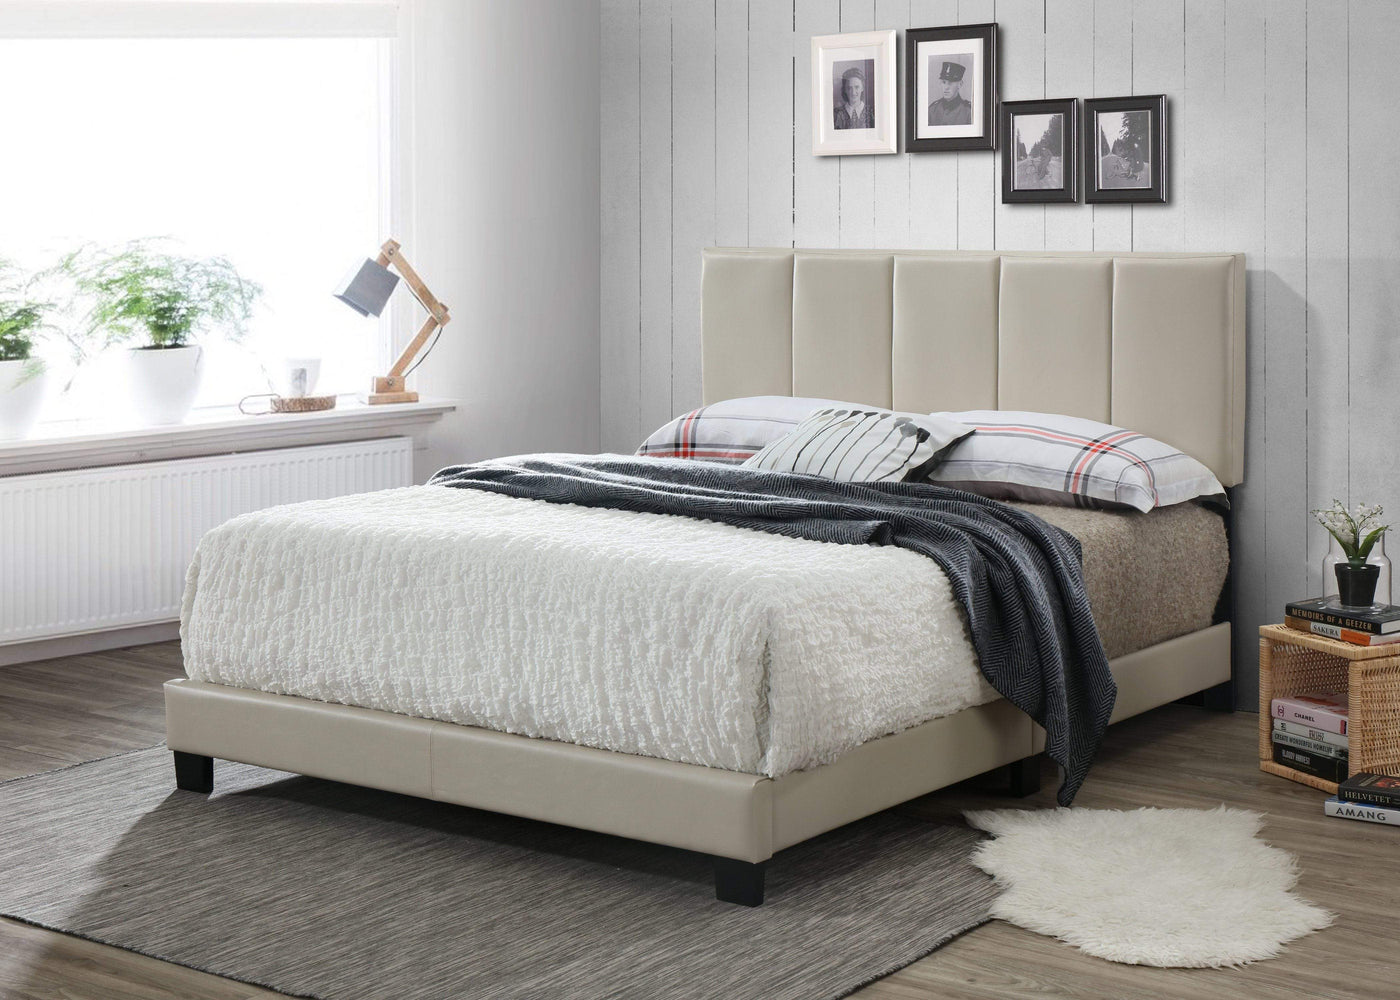 powell's furniture and mattress reviews